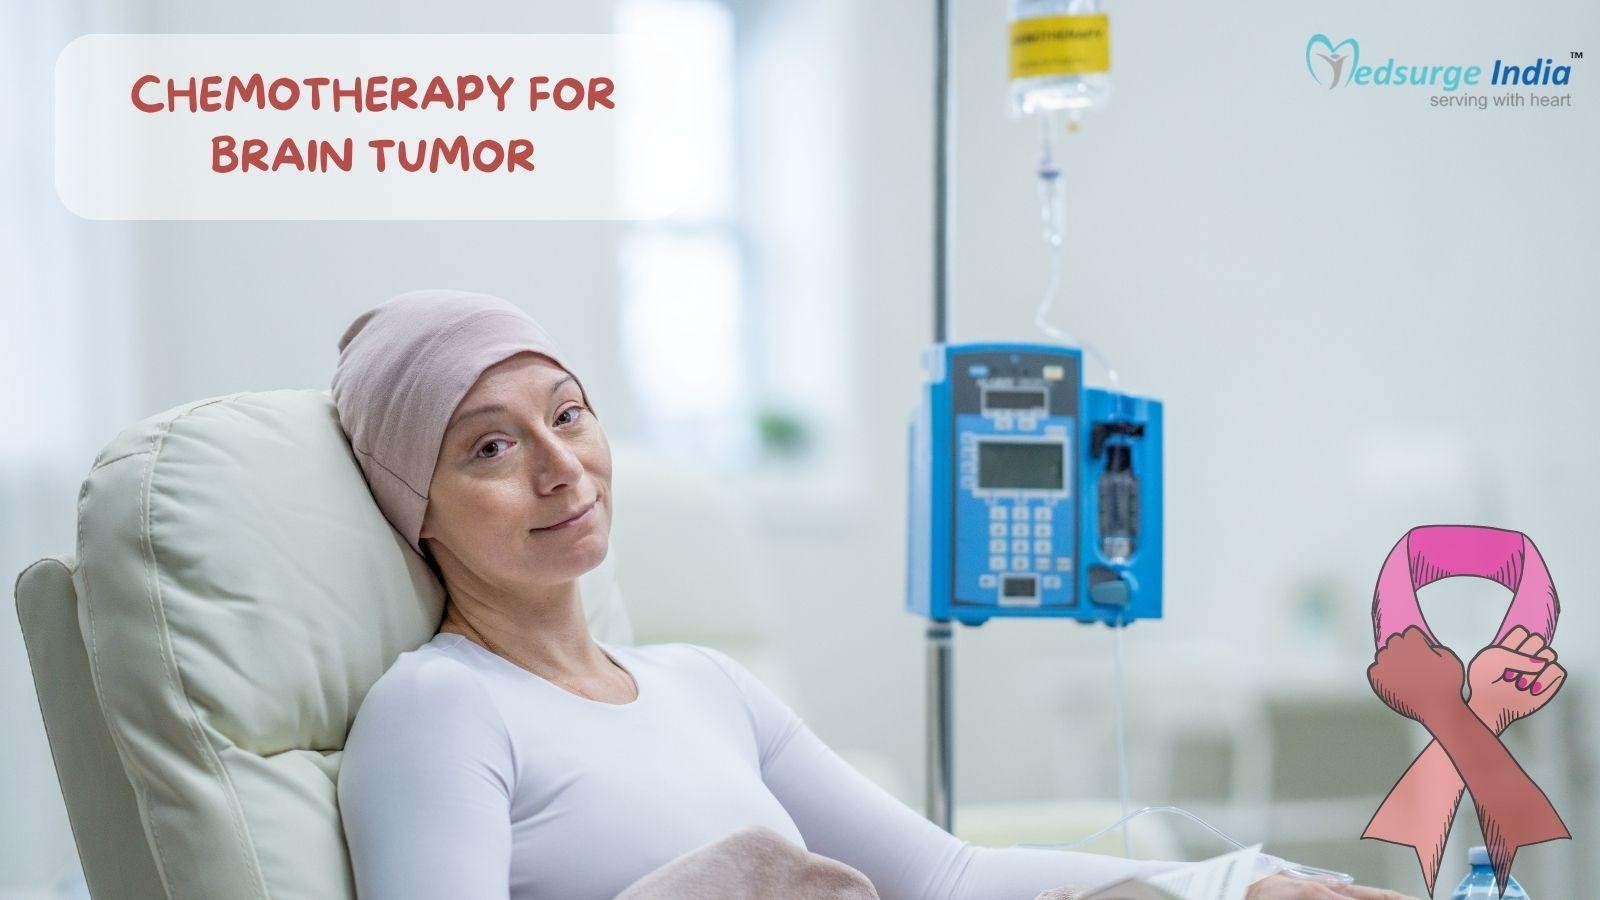 Chemotherapy For Brain Tumor: How It Is Done?